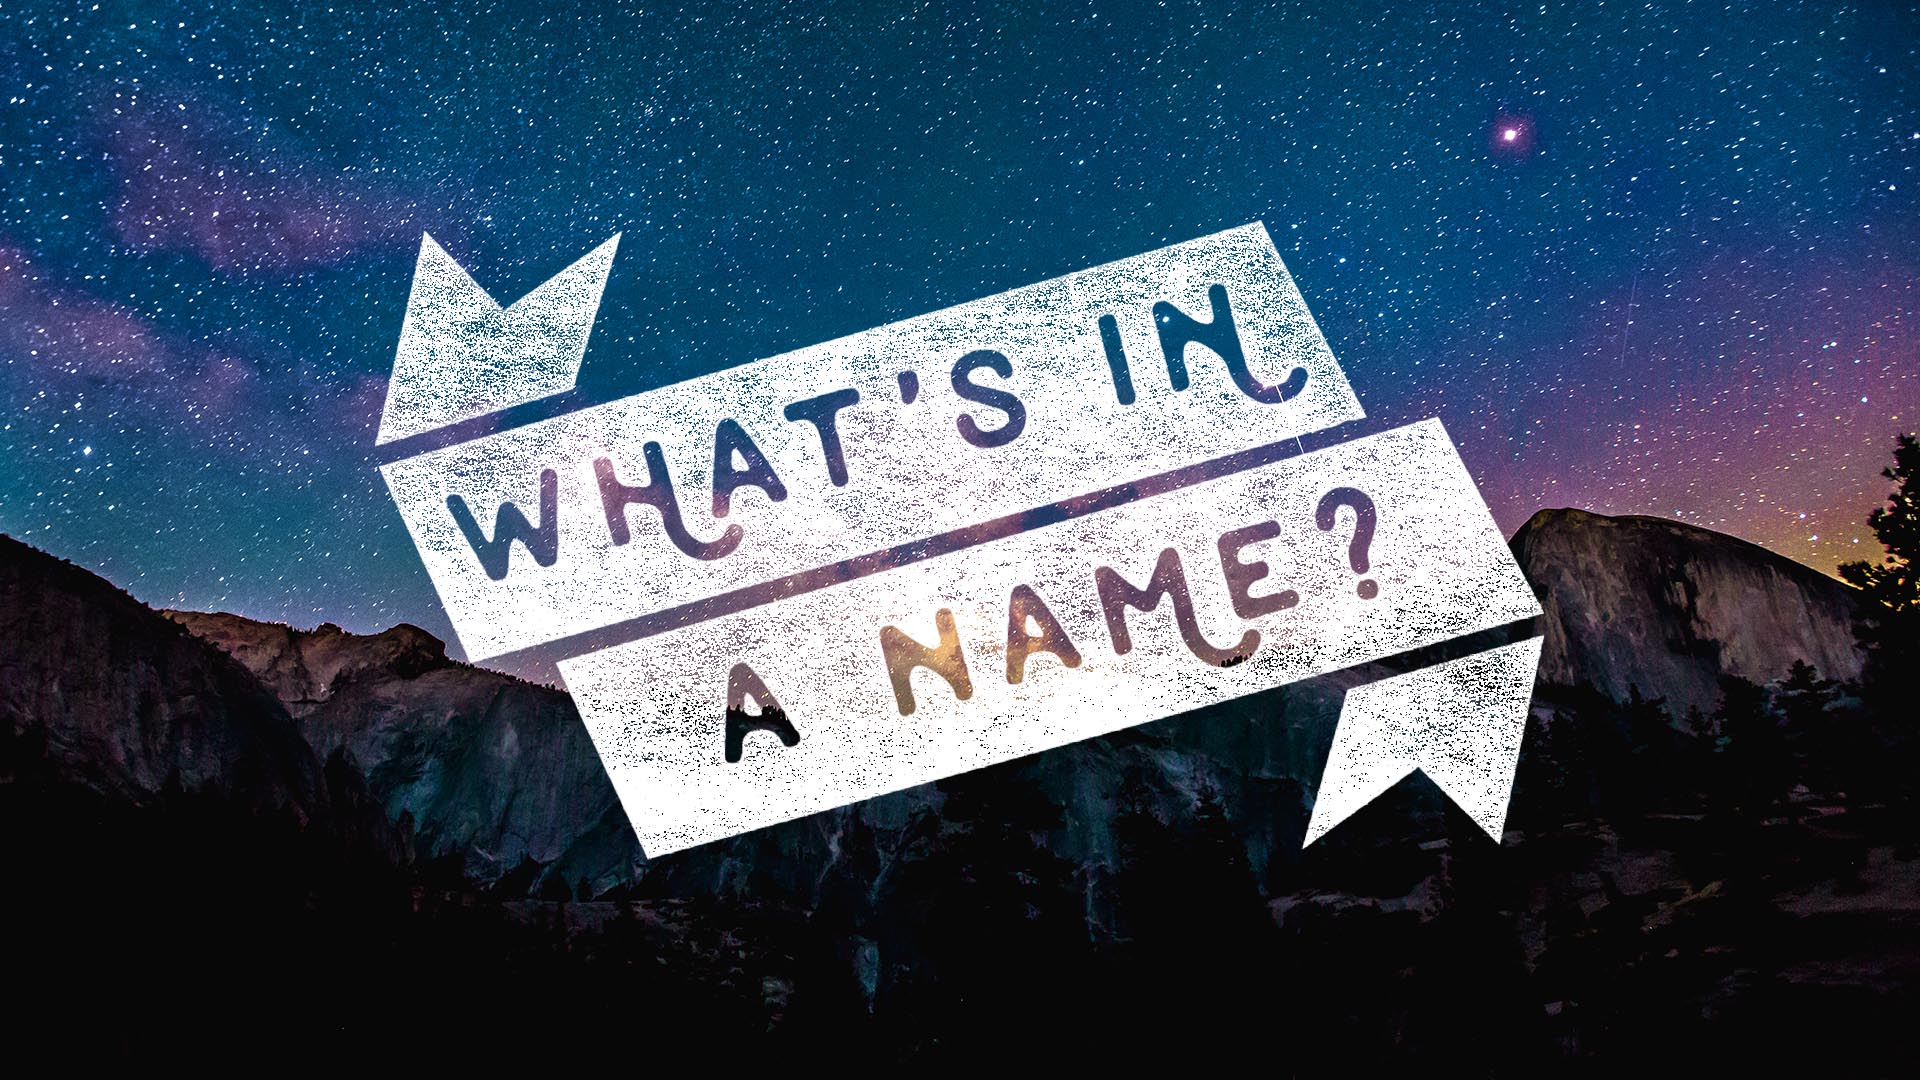 "What's In A Name" Message